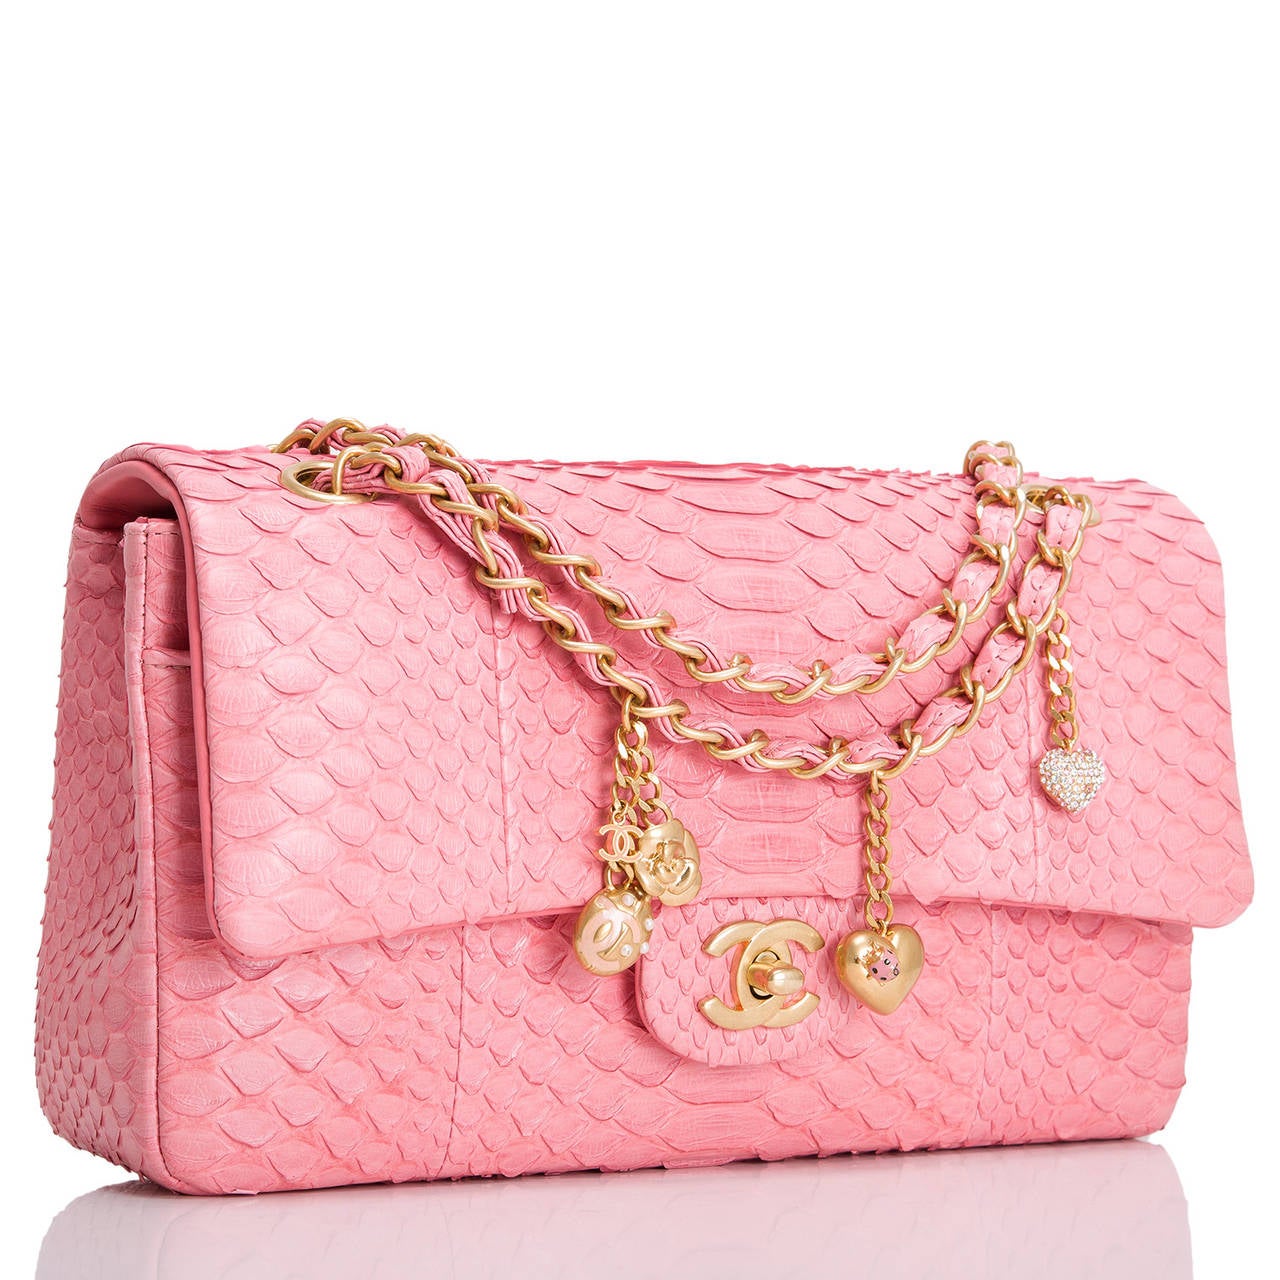 Chanel Light Pink Python Small Flap Bag . Very Good to Excellent, Lot  #58025